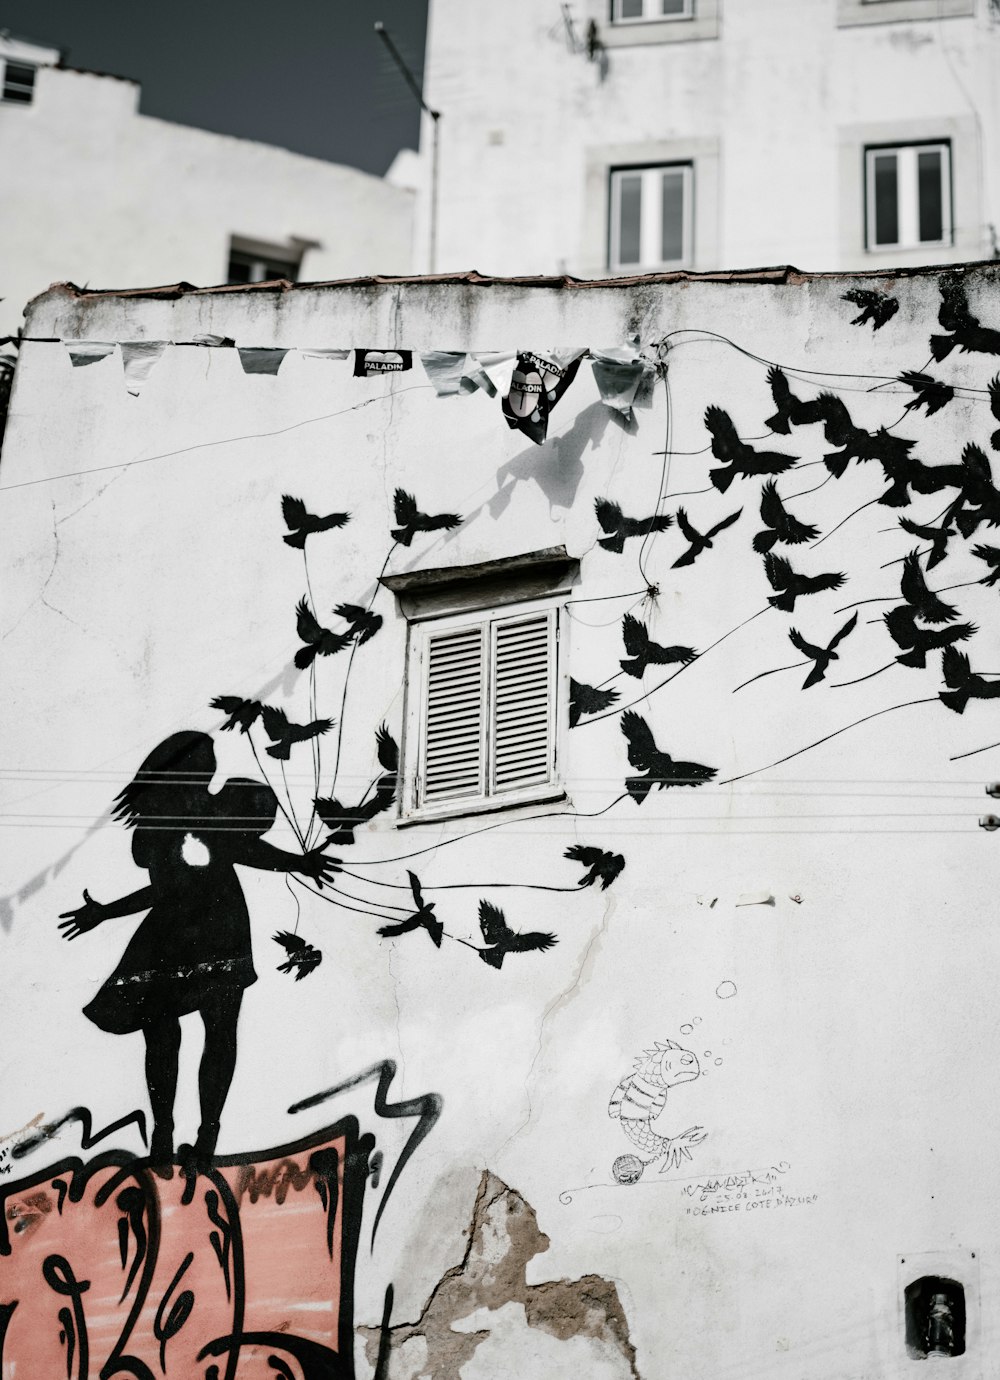 man and woman kissing each other with flight of bird graffiti